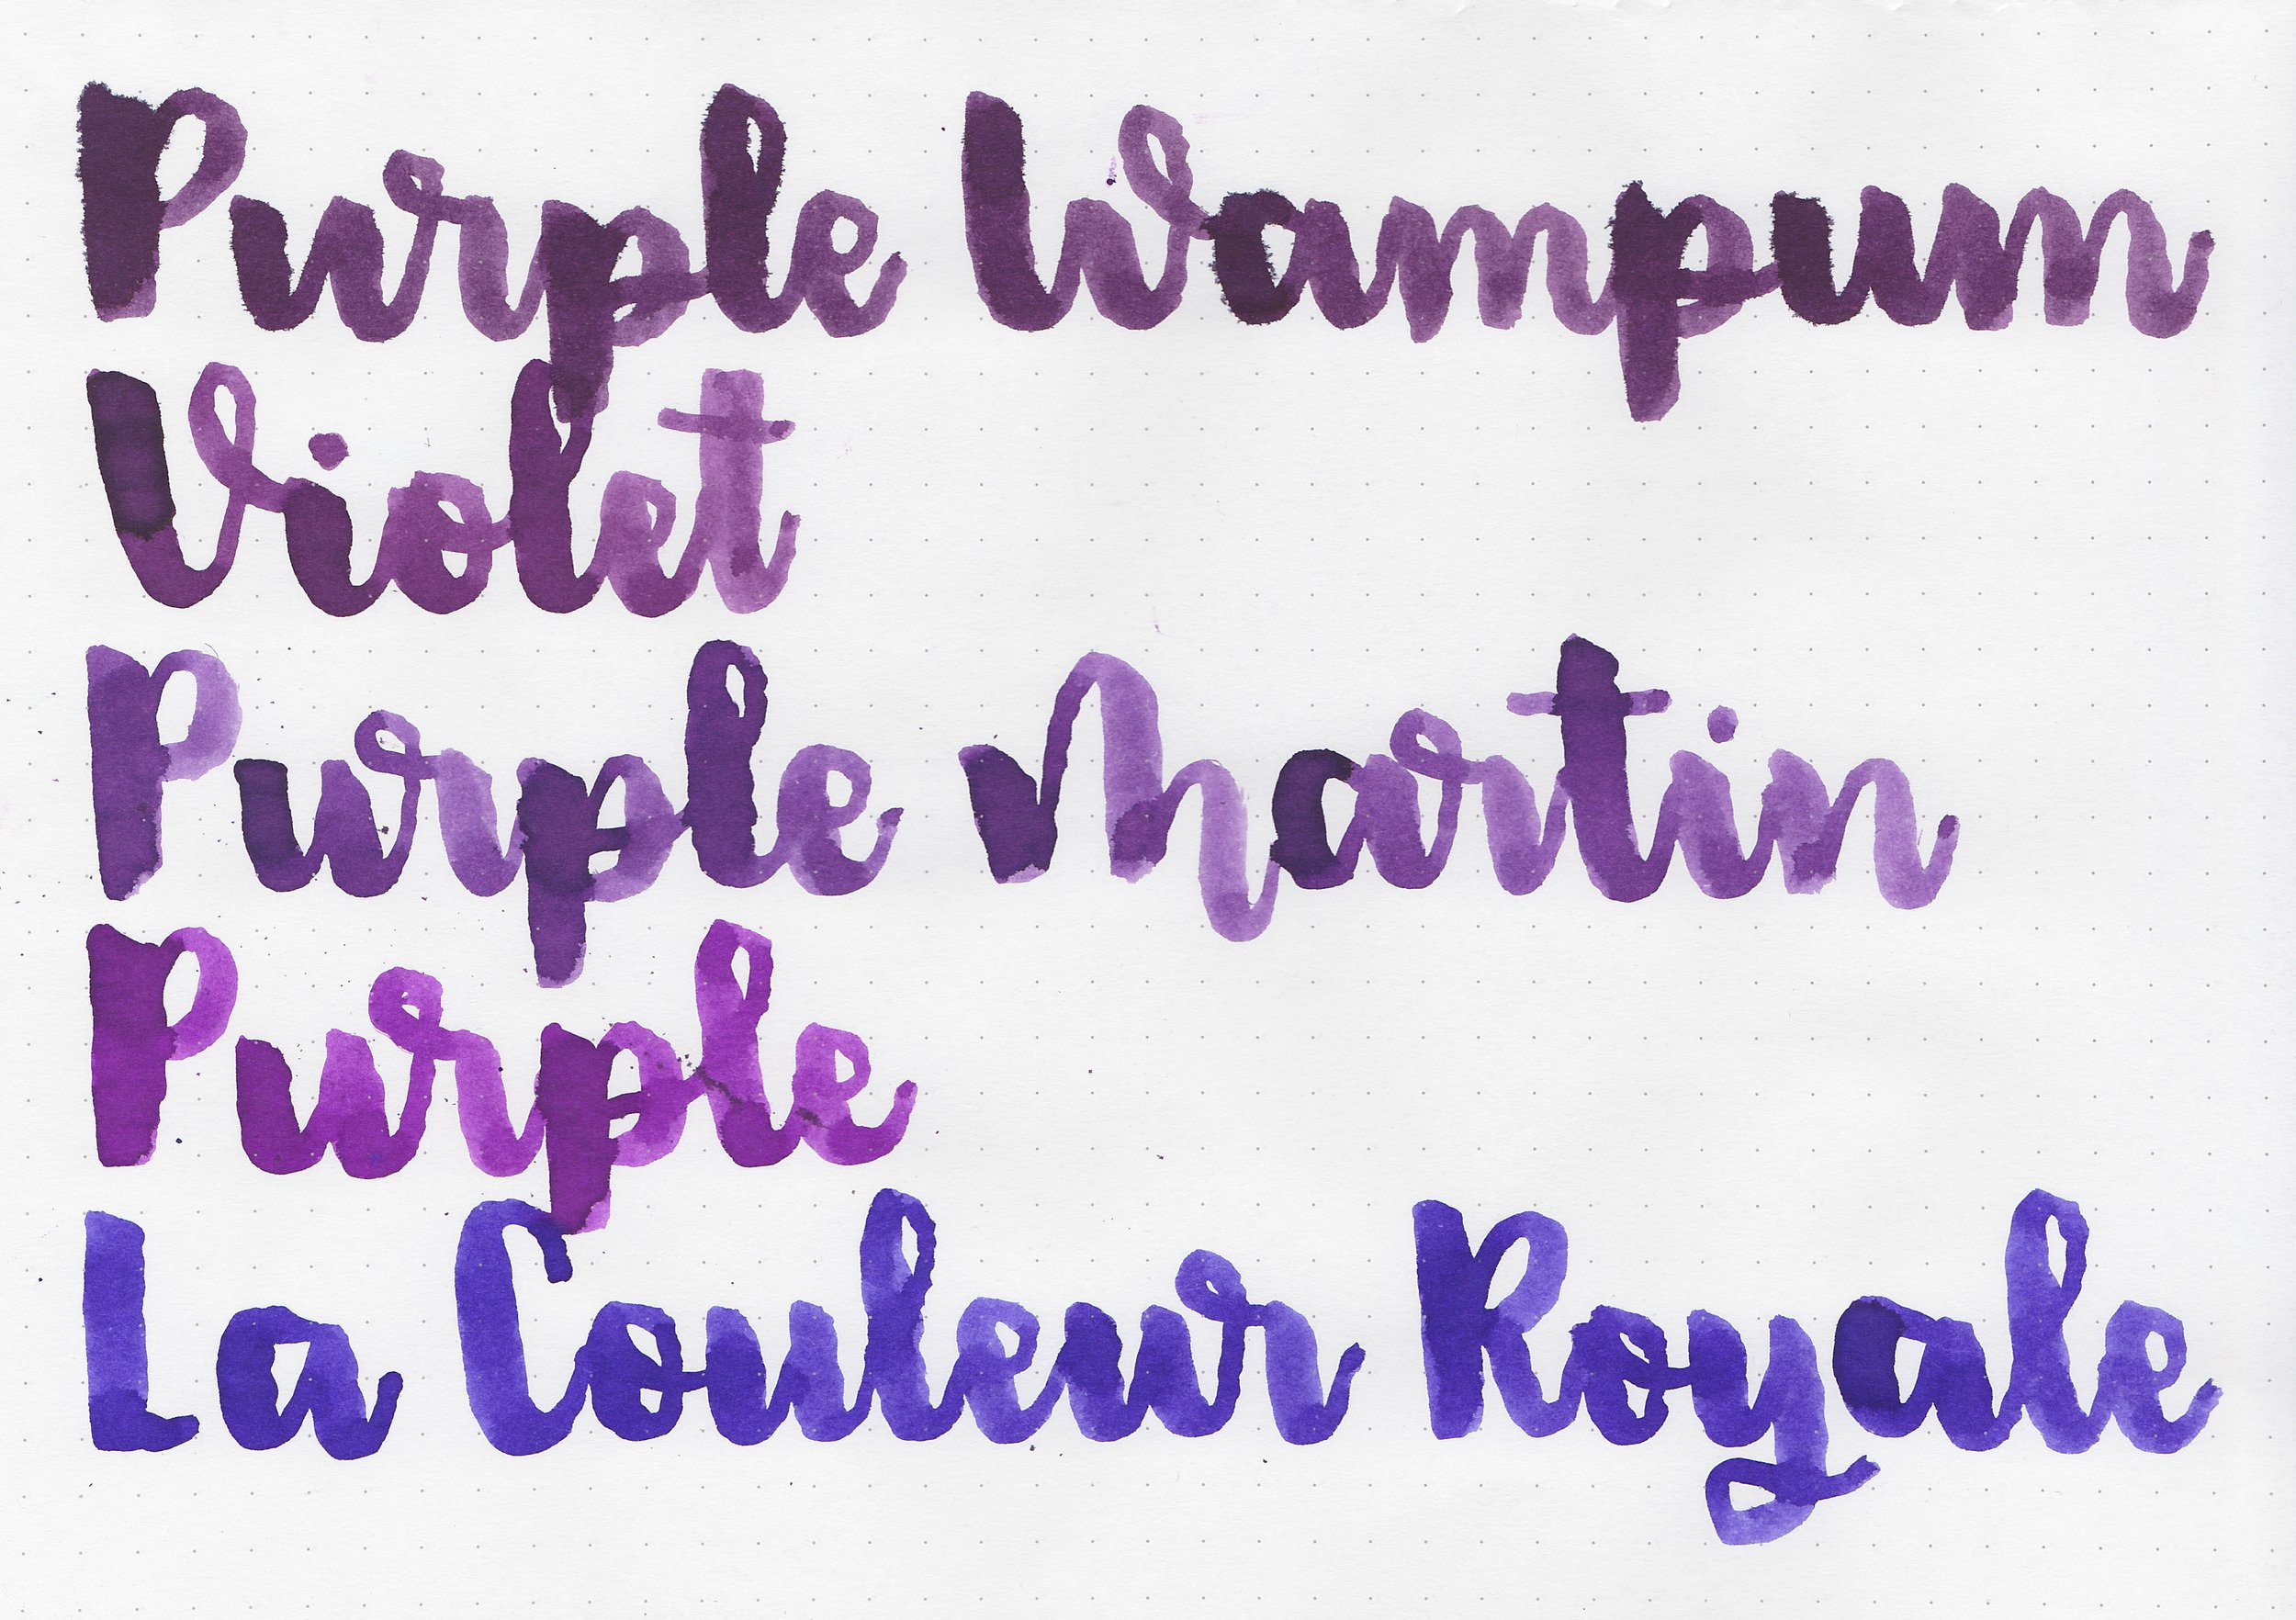 Noodler's Purples — Mountain of Ink